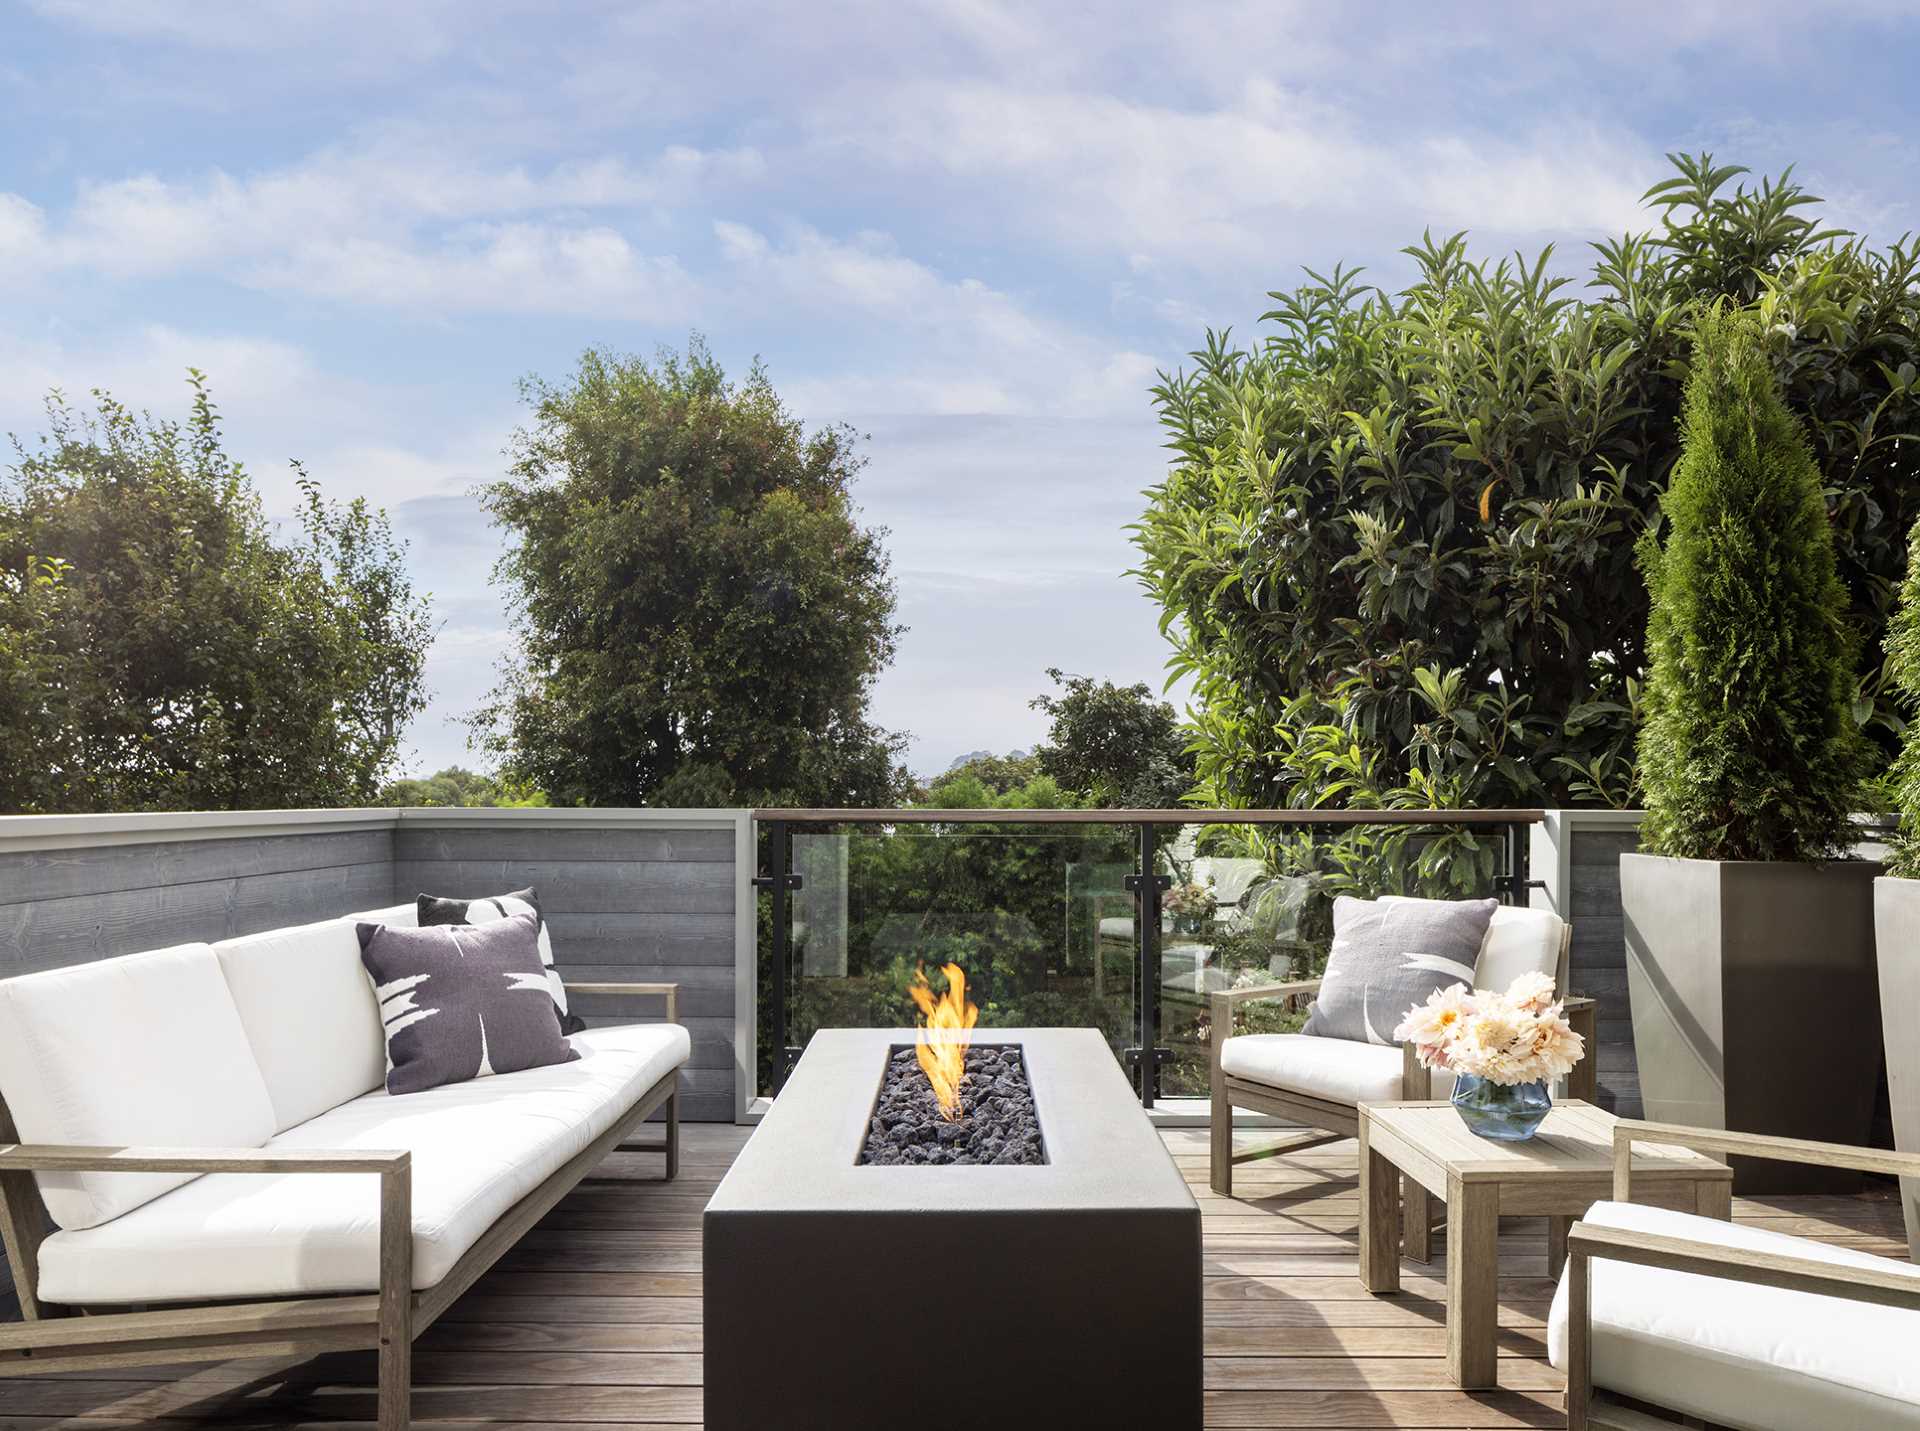 A modern deck with an outdoor fireplace and lounge seating.